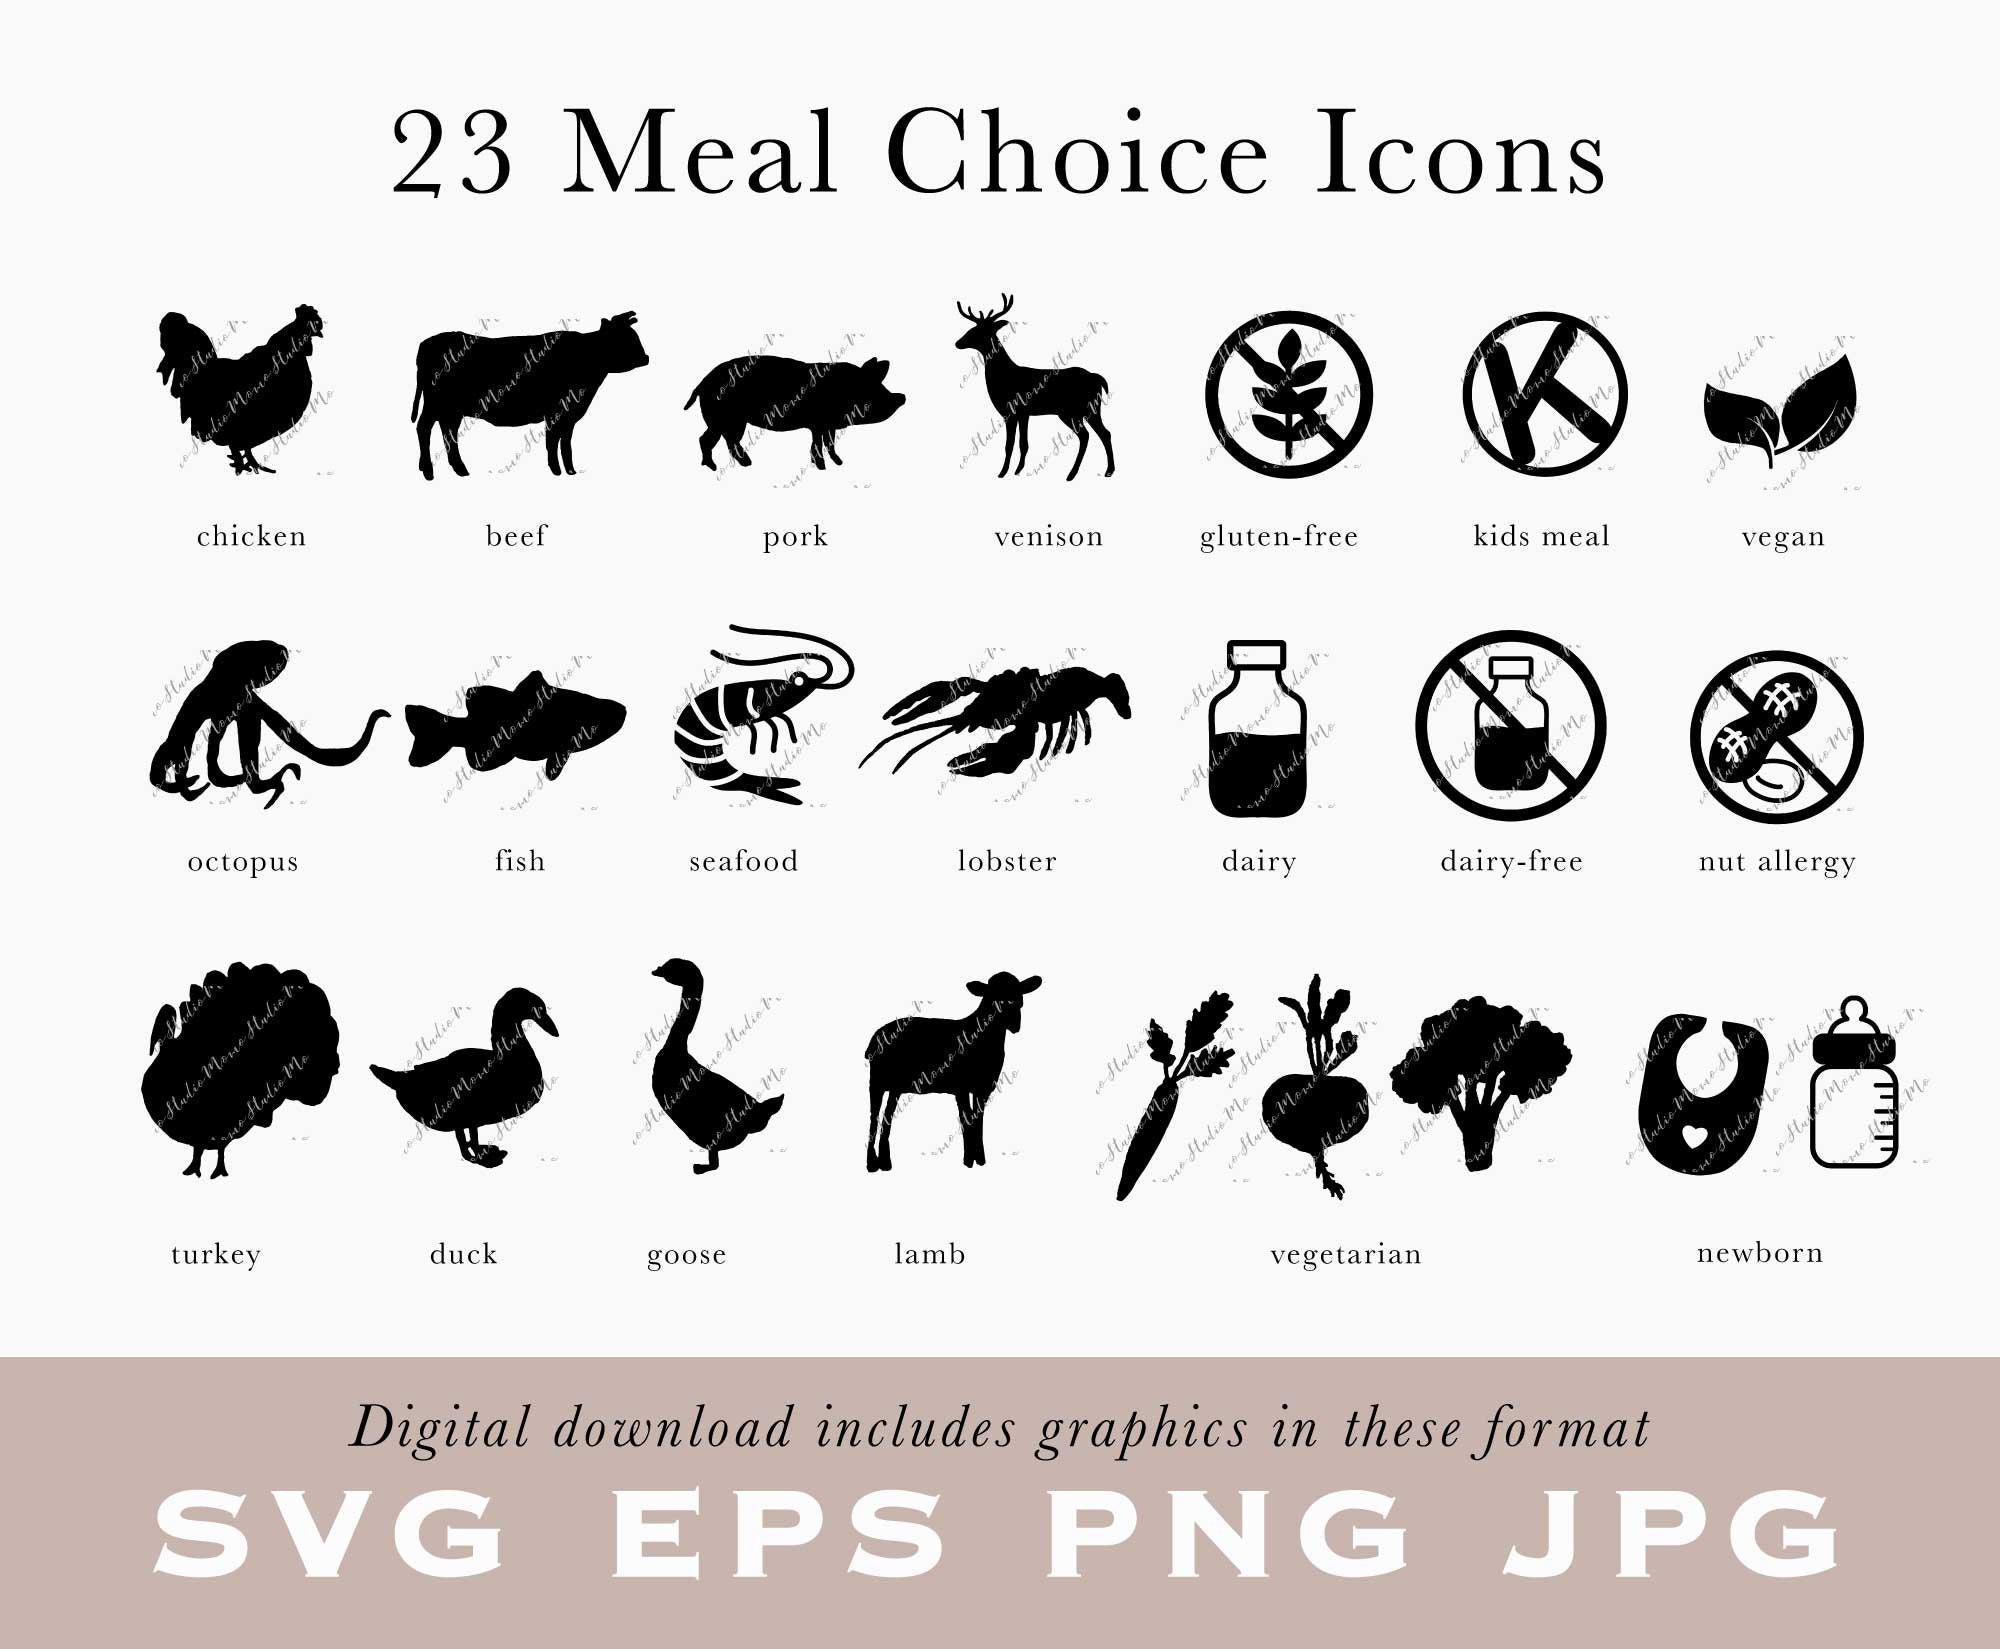 Egg Free icon PNG and SVG Vector Free Download